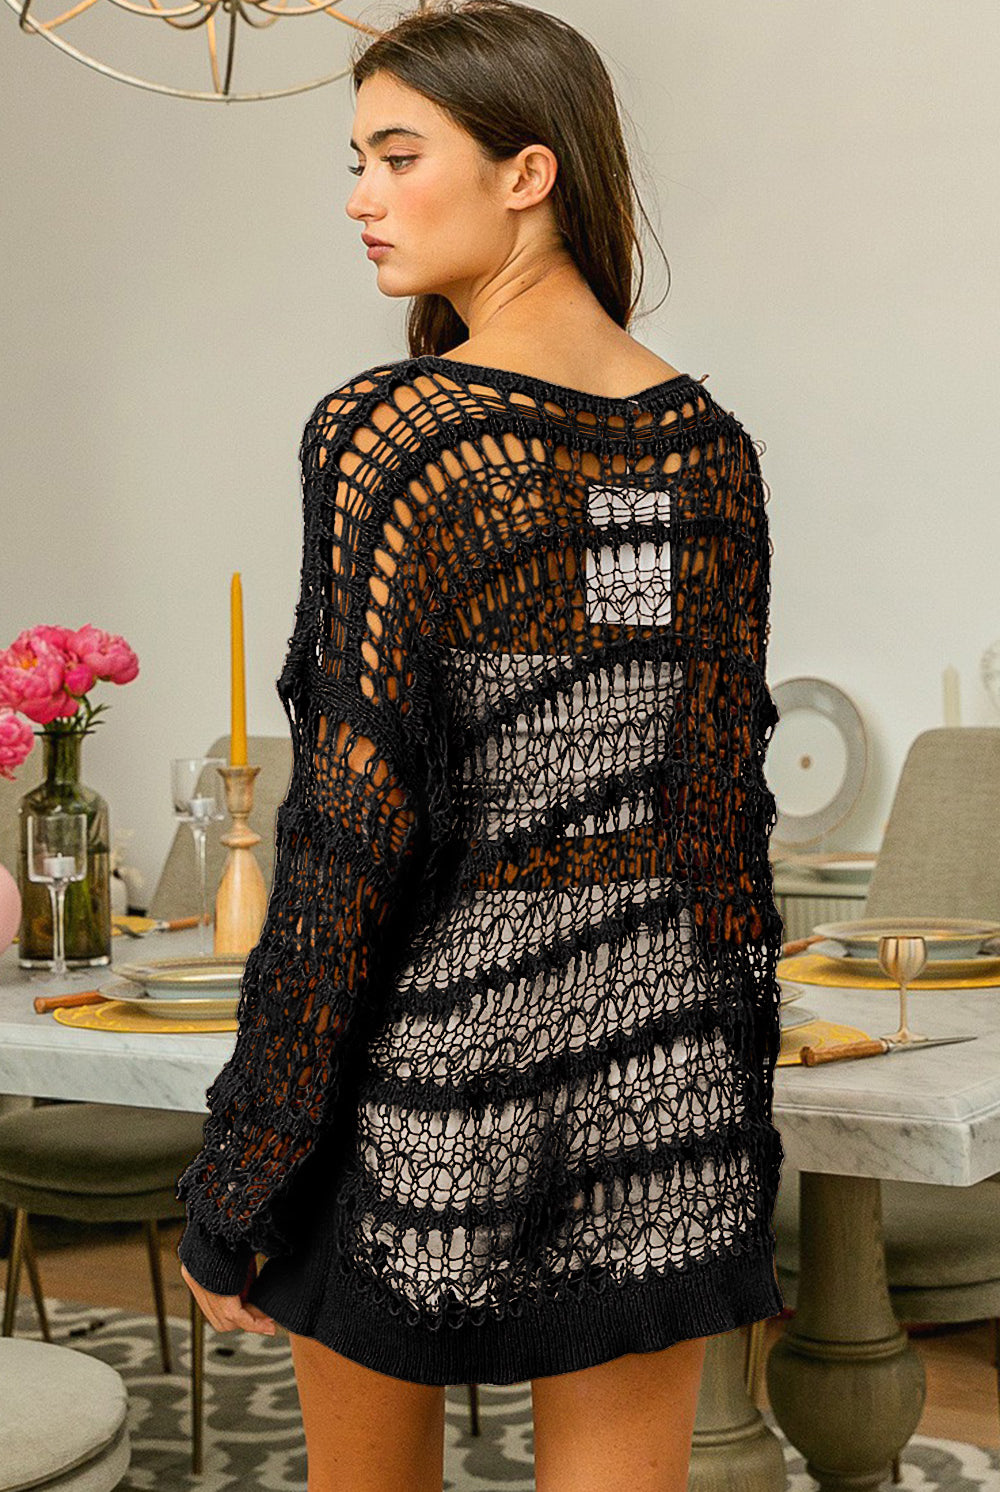 Stylish woman posing in a black long sleeve crochet knit cover-up, perfect for versatile layering.